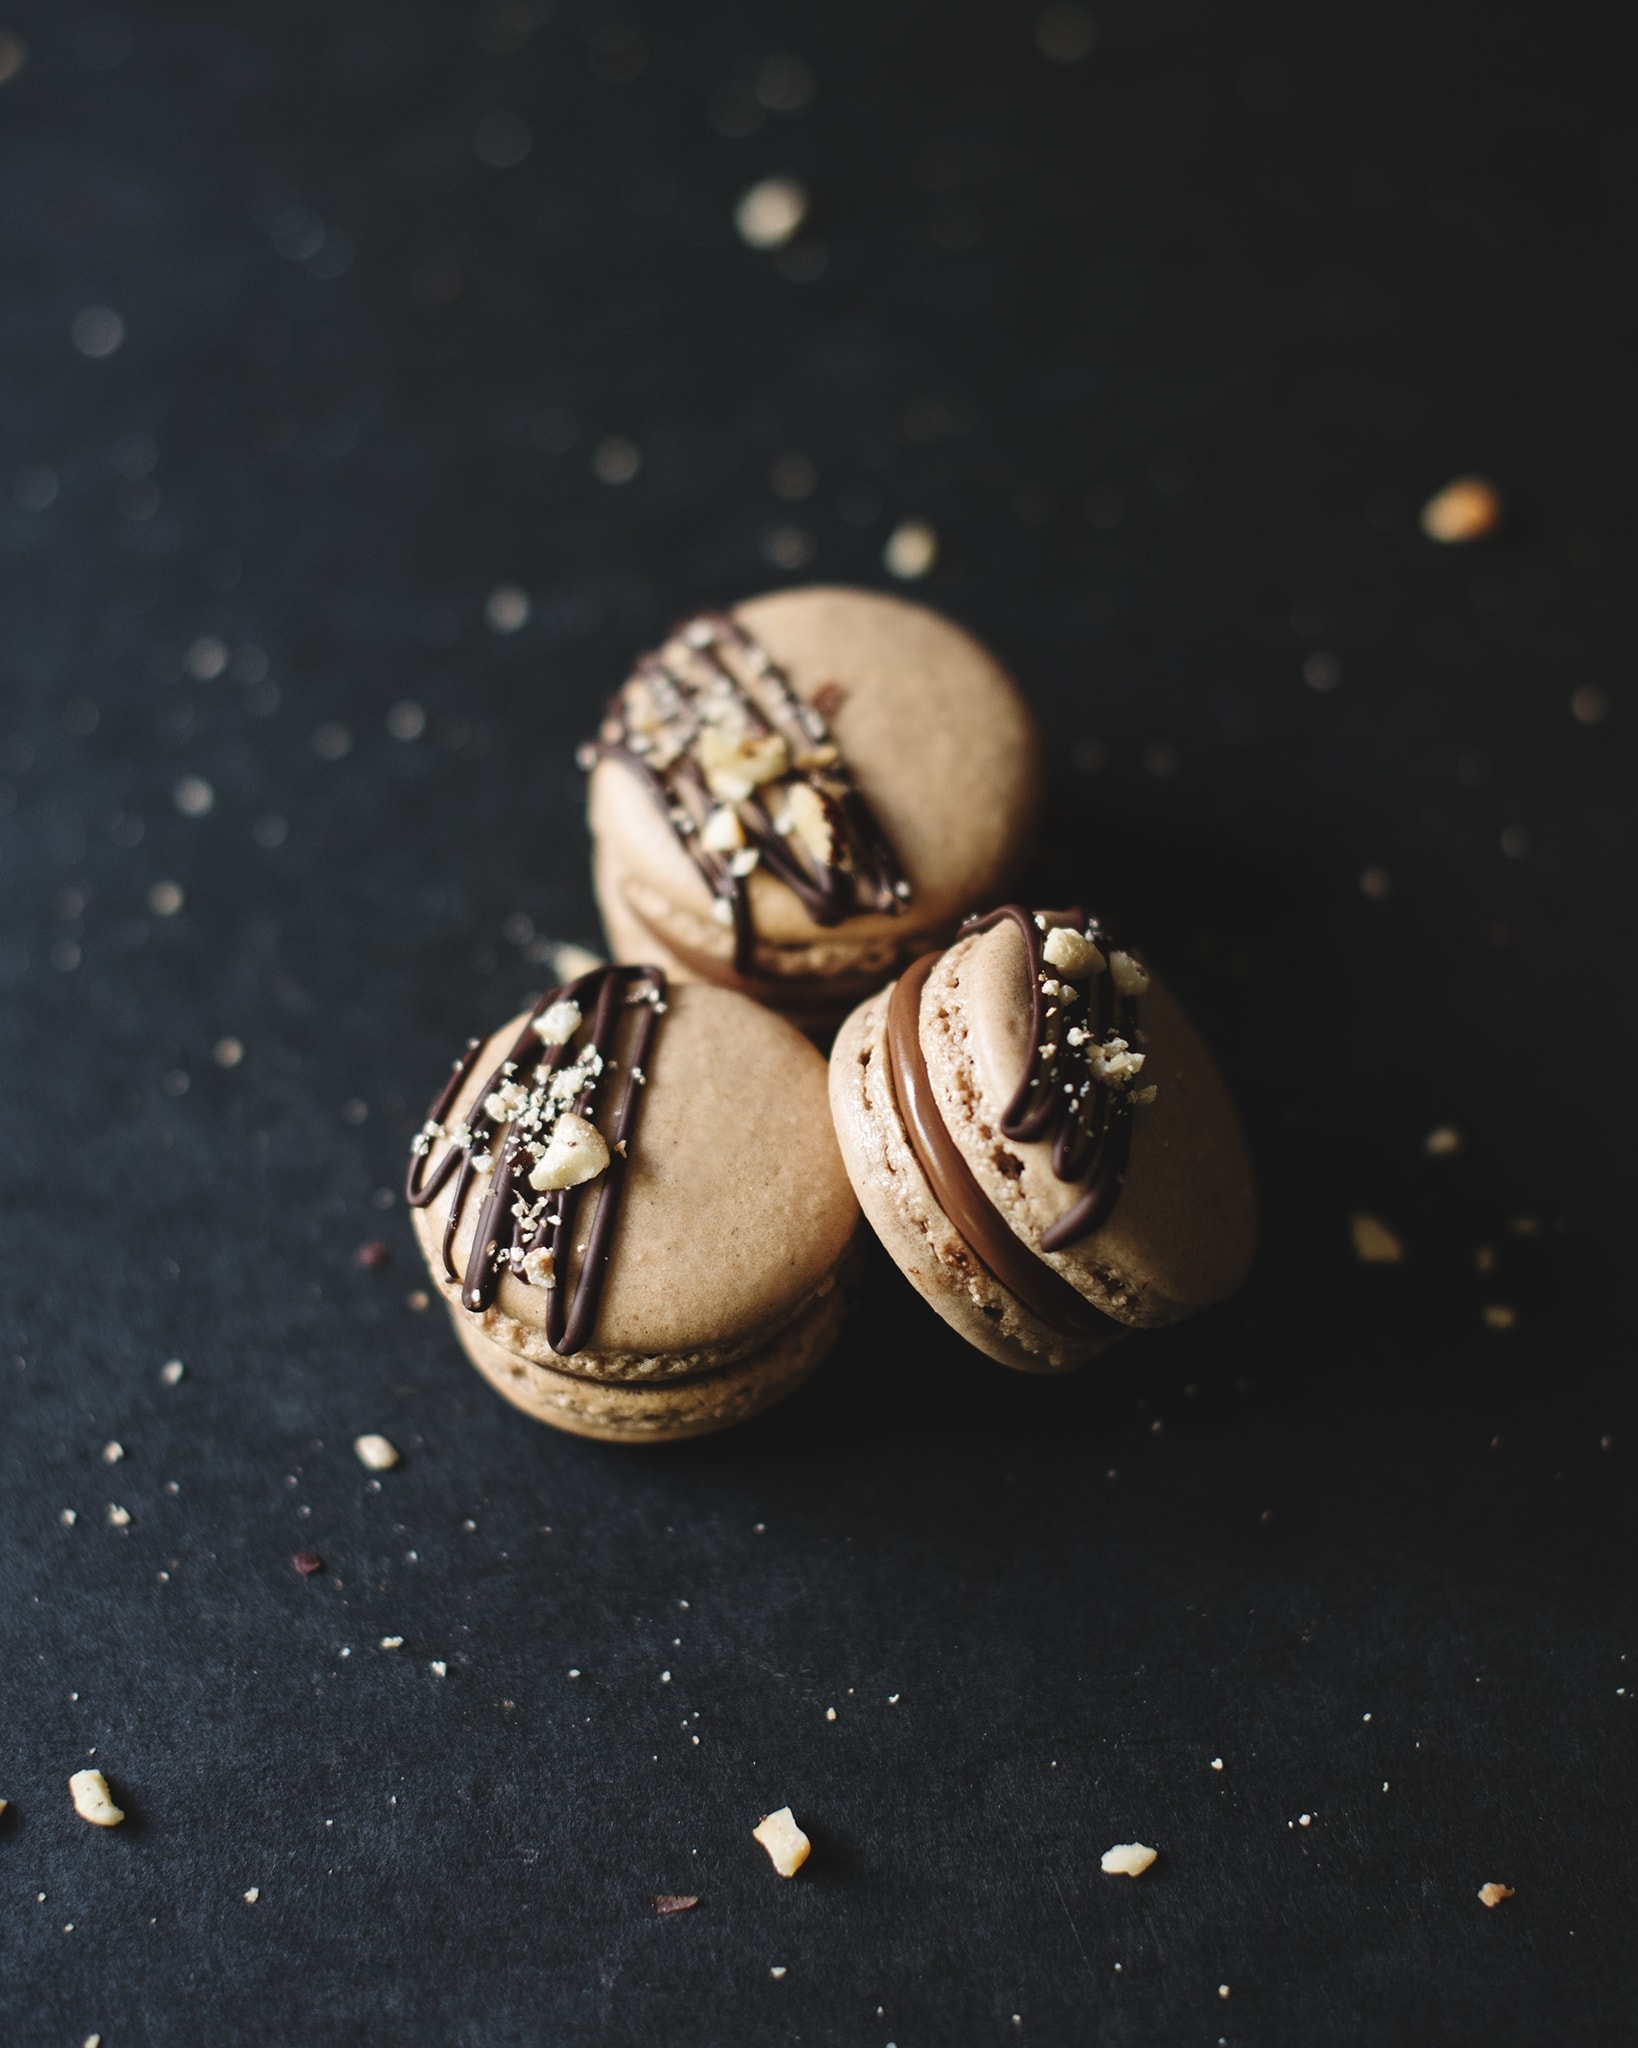 3 Ferrero Rocher macarons on a black background surrounded by crushed hazelnuts